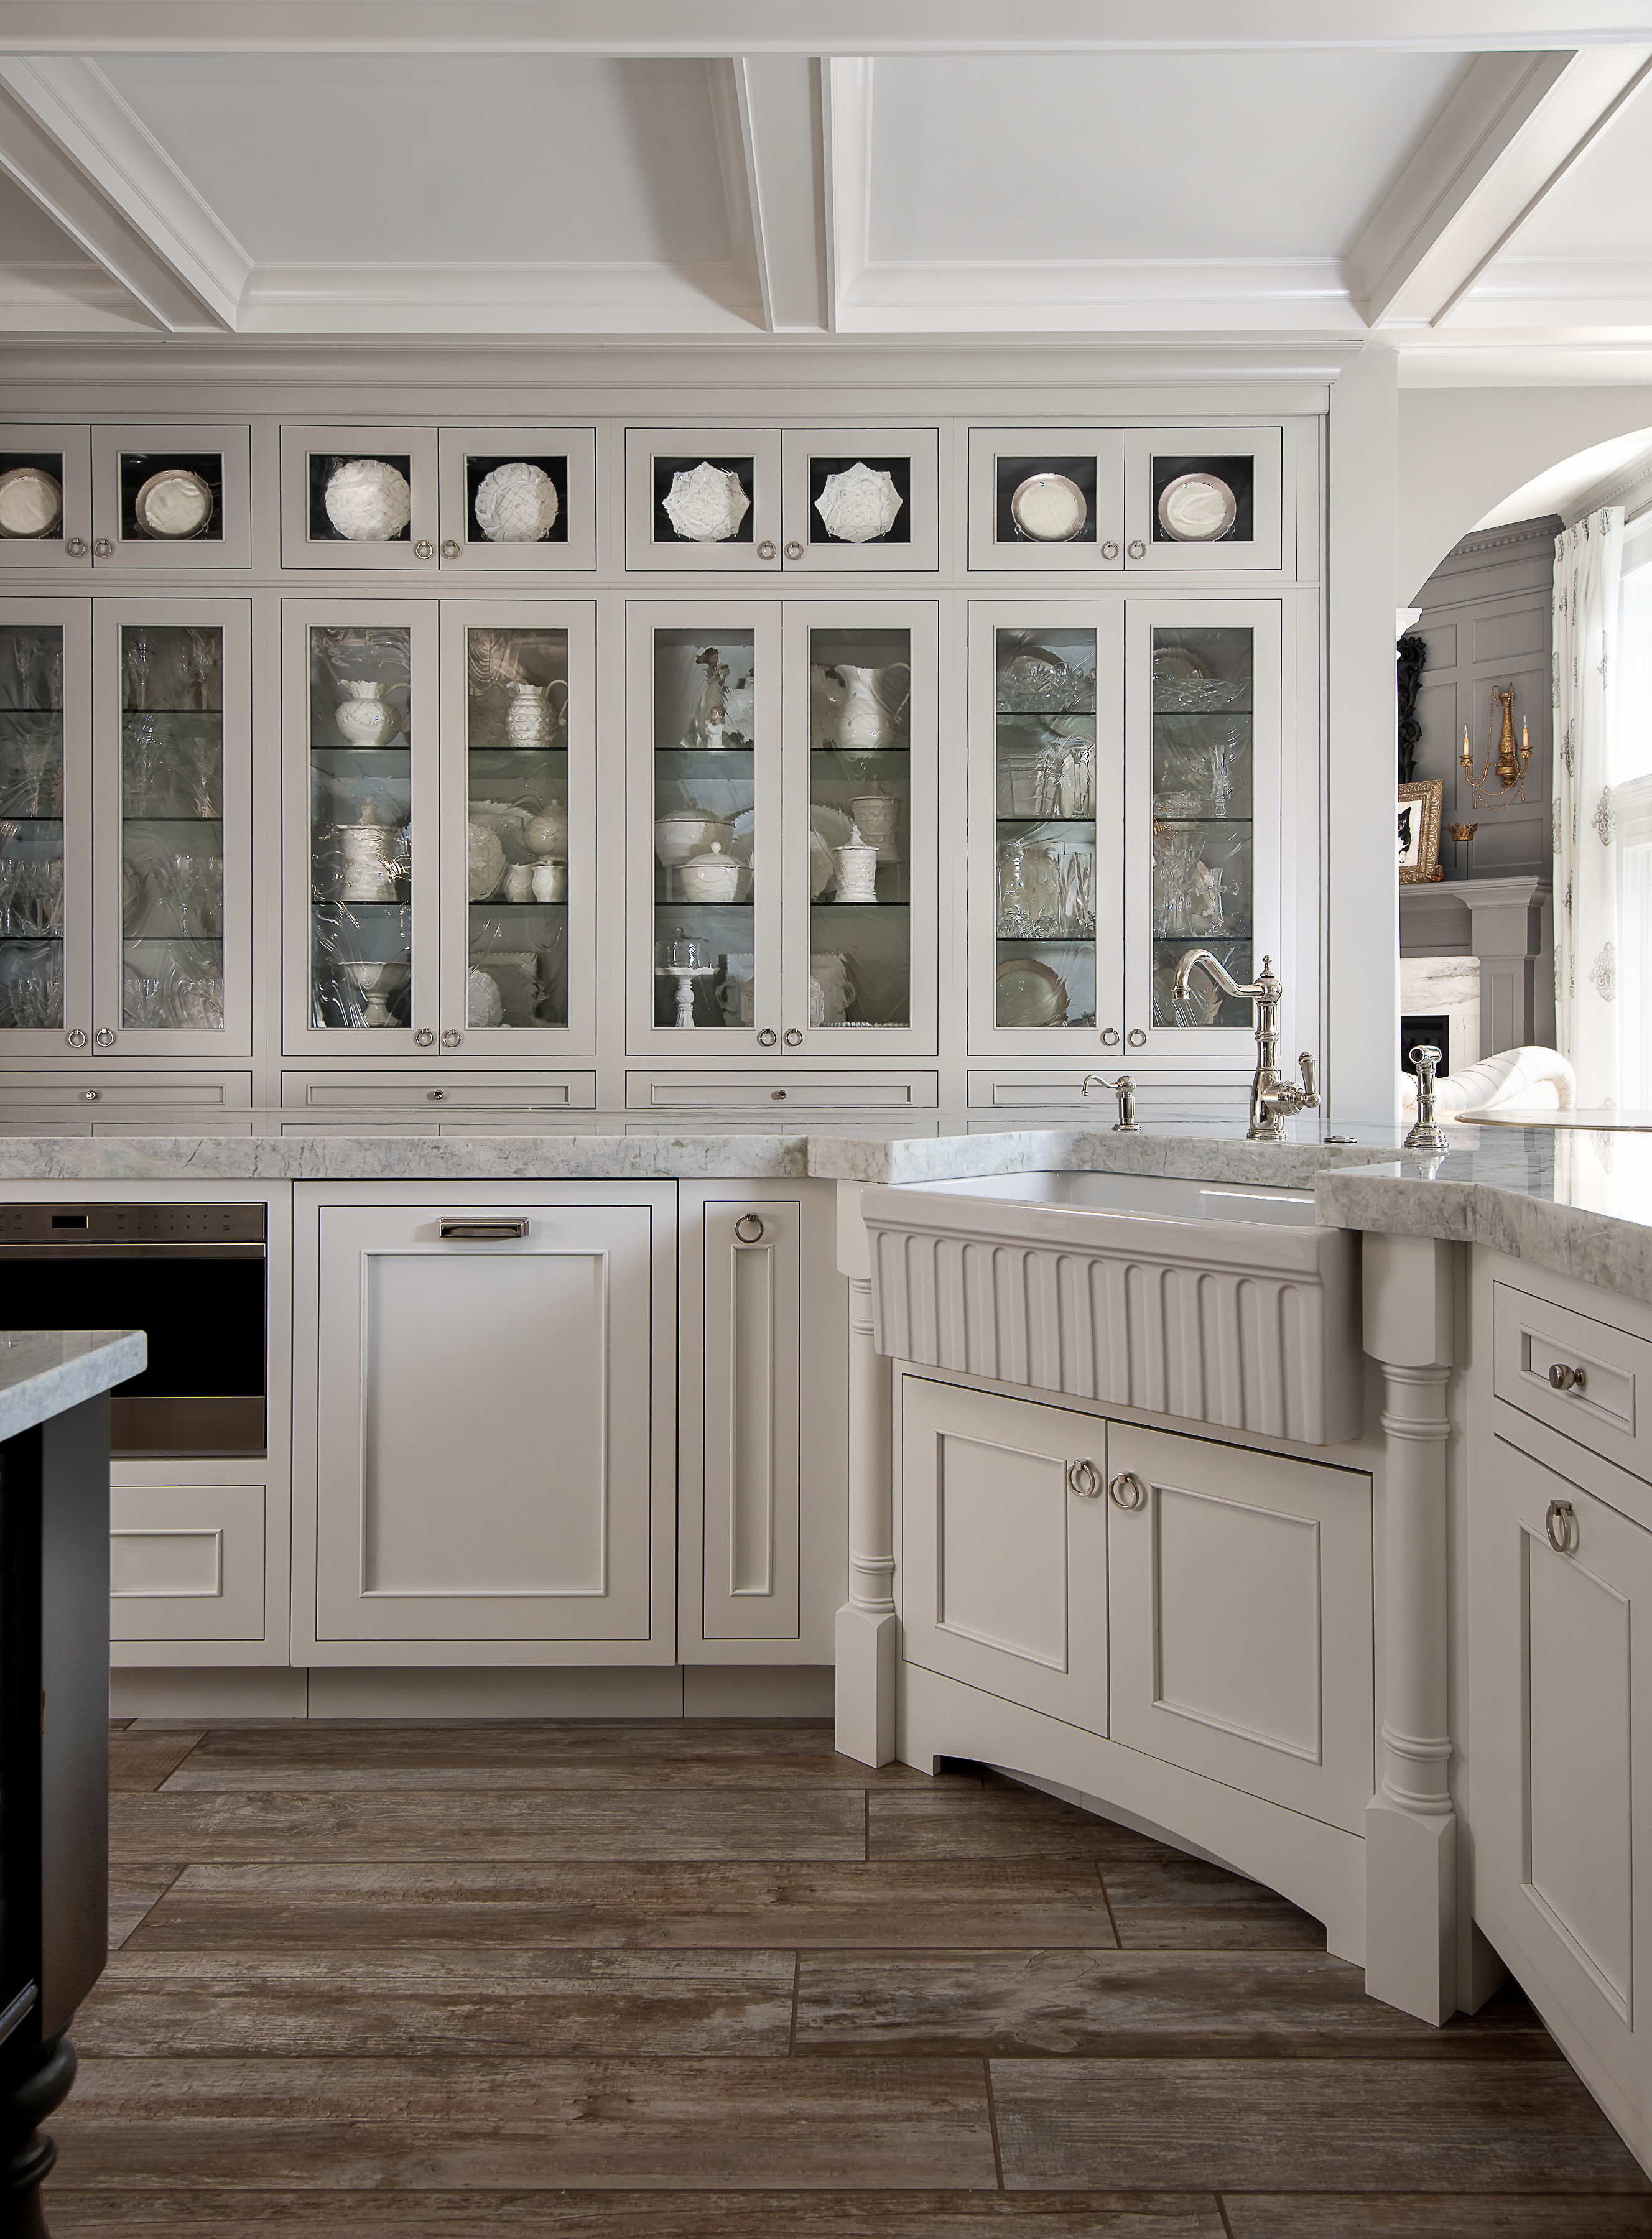 A traditional styled kitchen with white painted cabinets with a row of glass doors for dishware storage and display.